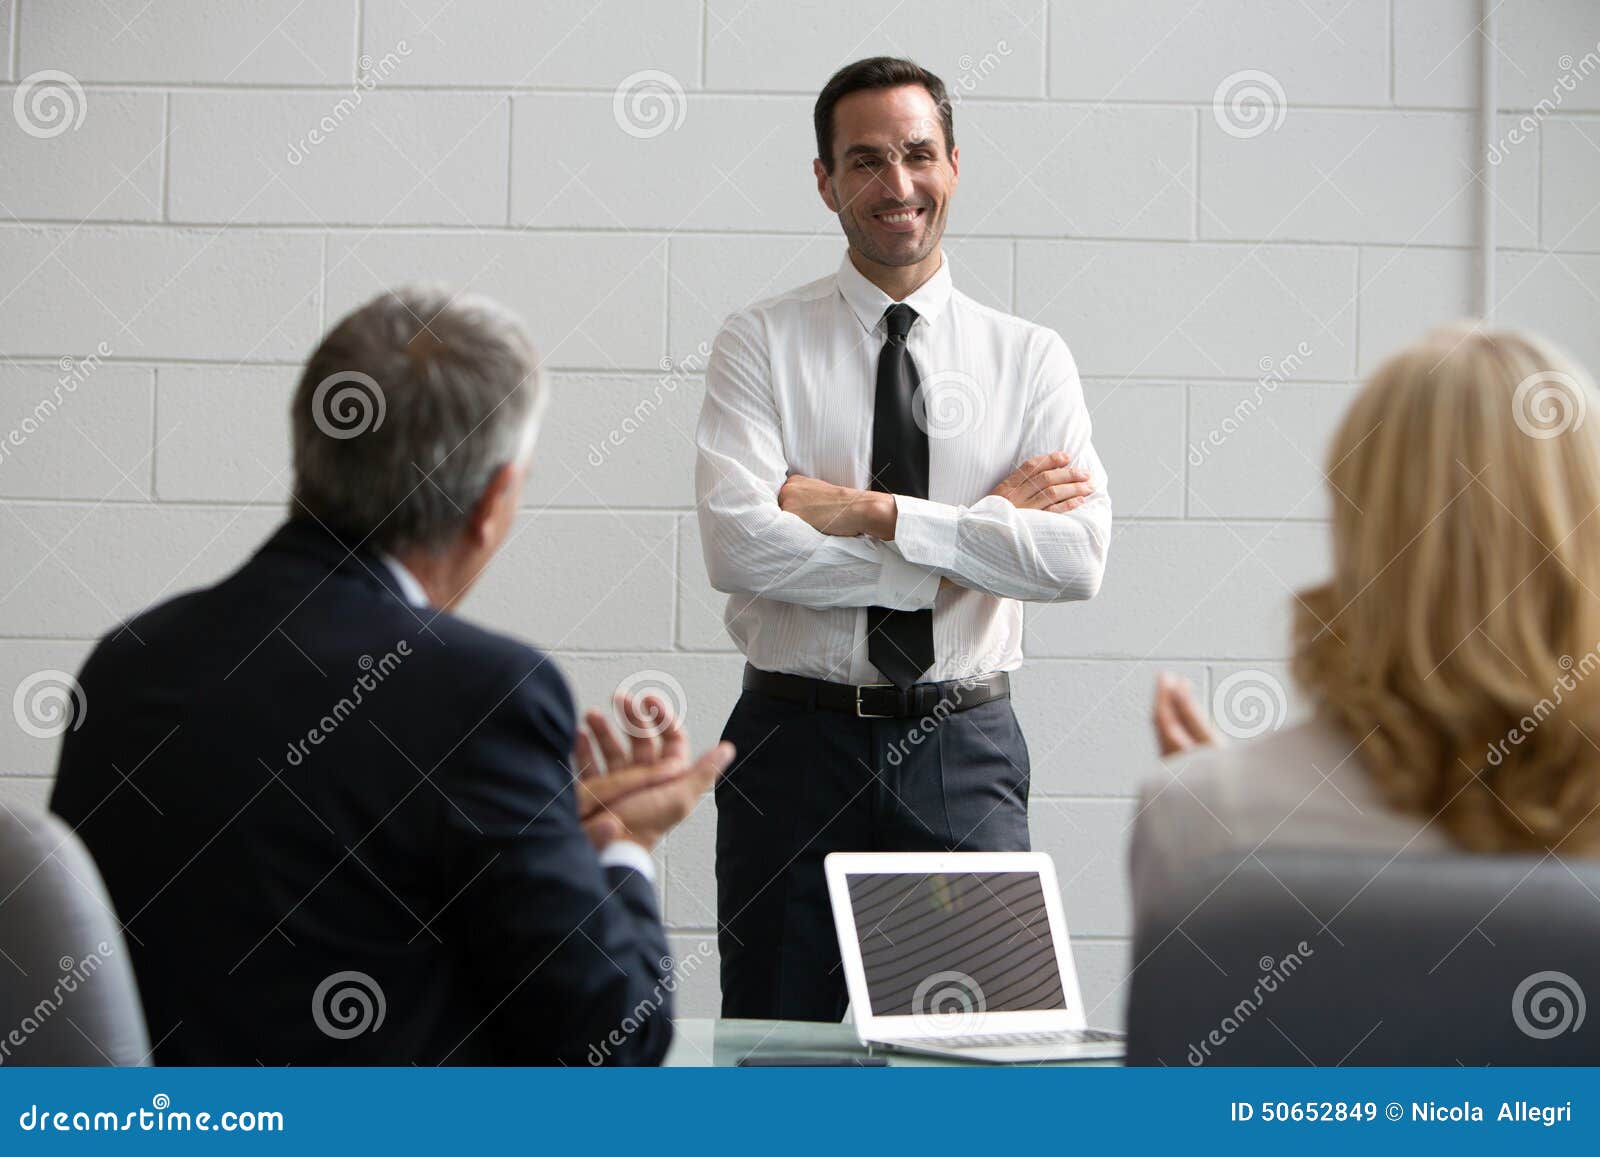 three businesspeople during a meeting